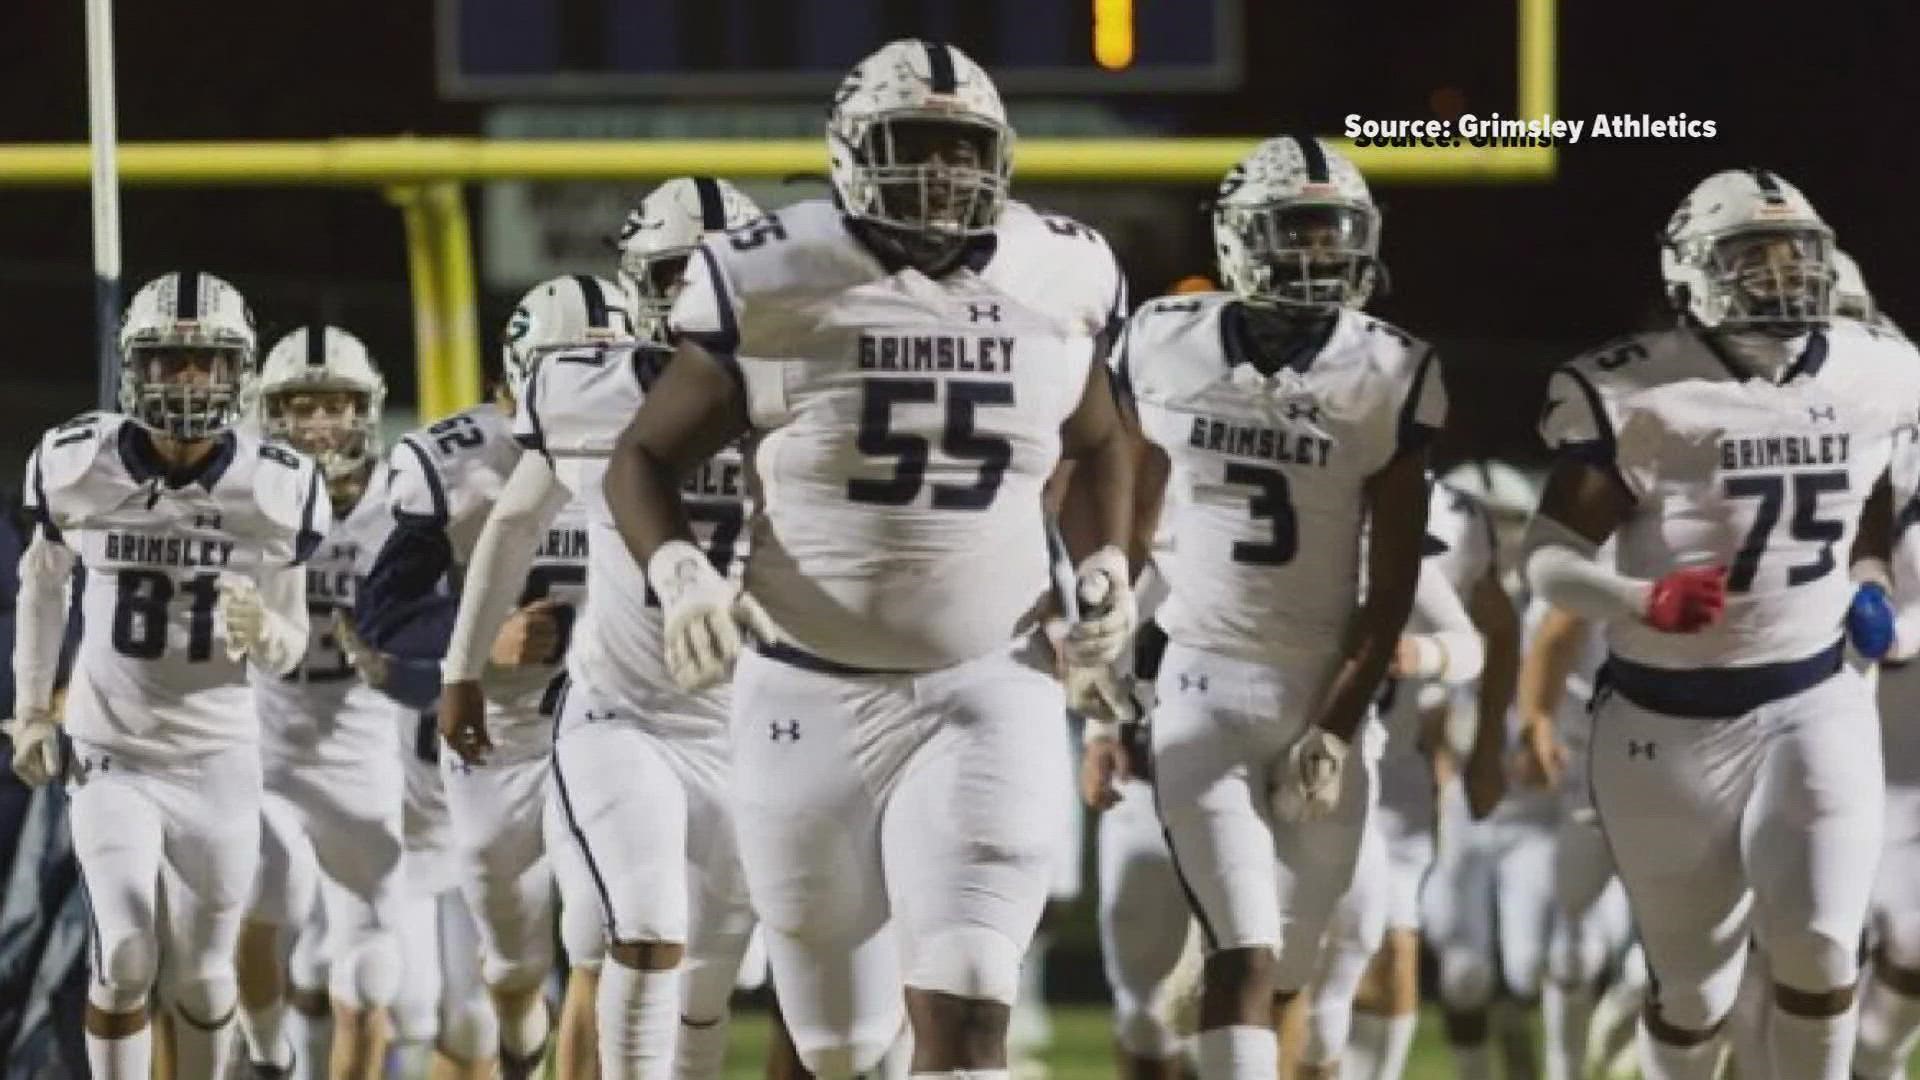 Jamaal "Big Jah" Jarrett joins DJ Reader and Travis Shaw as the newest notable name coming out of Grimsley's football program.